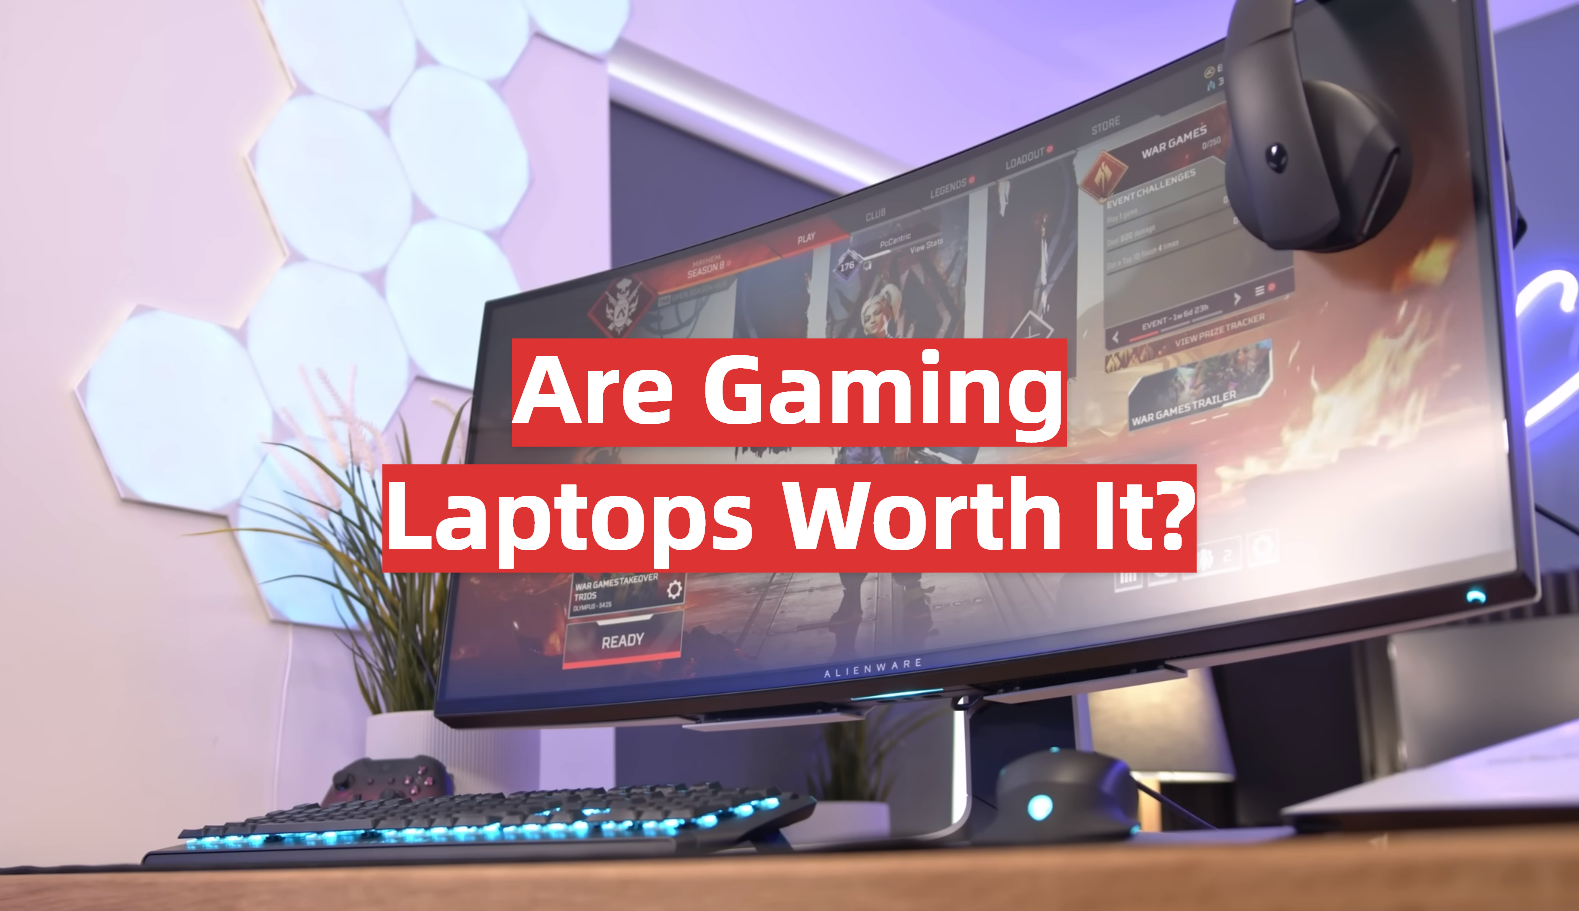 Are Gaming Laptops Worth It?